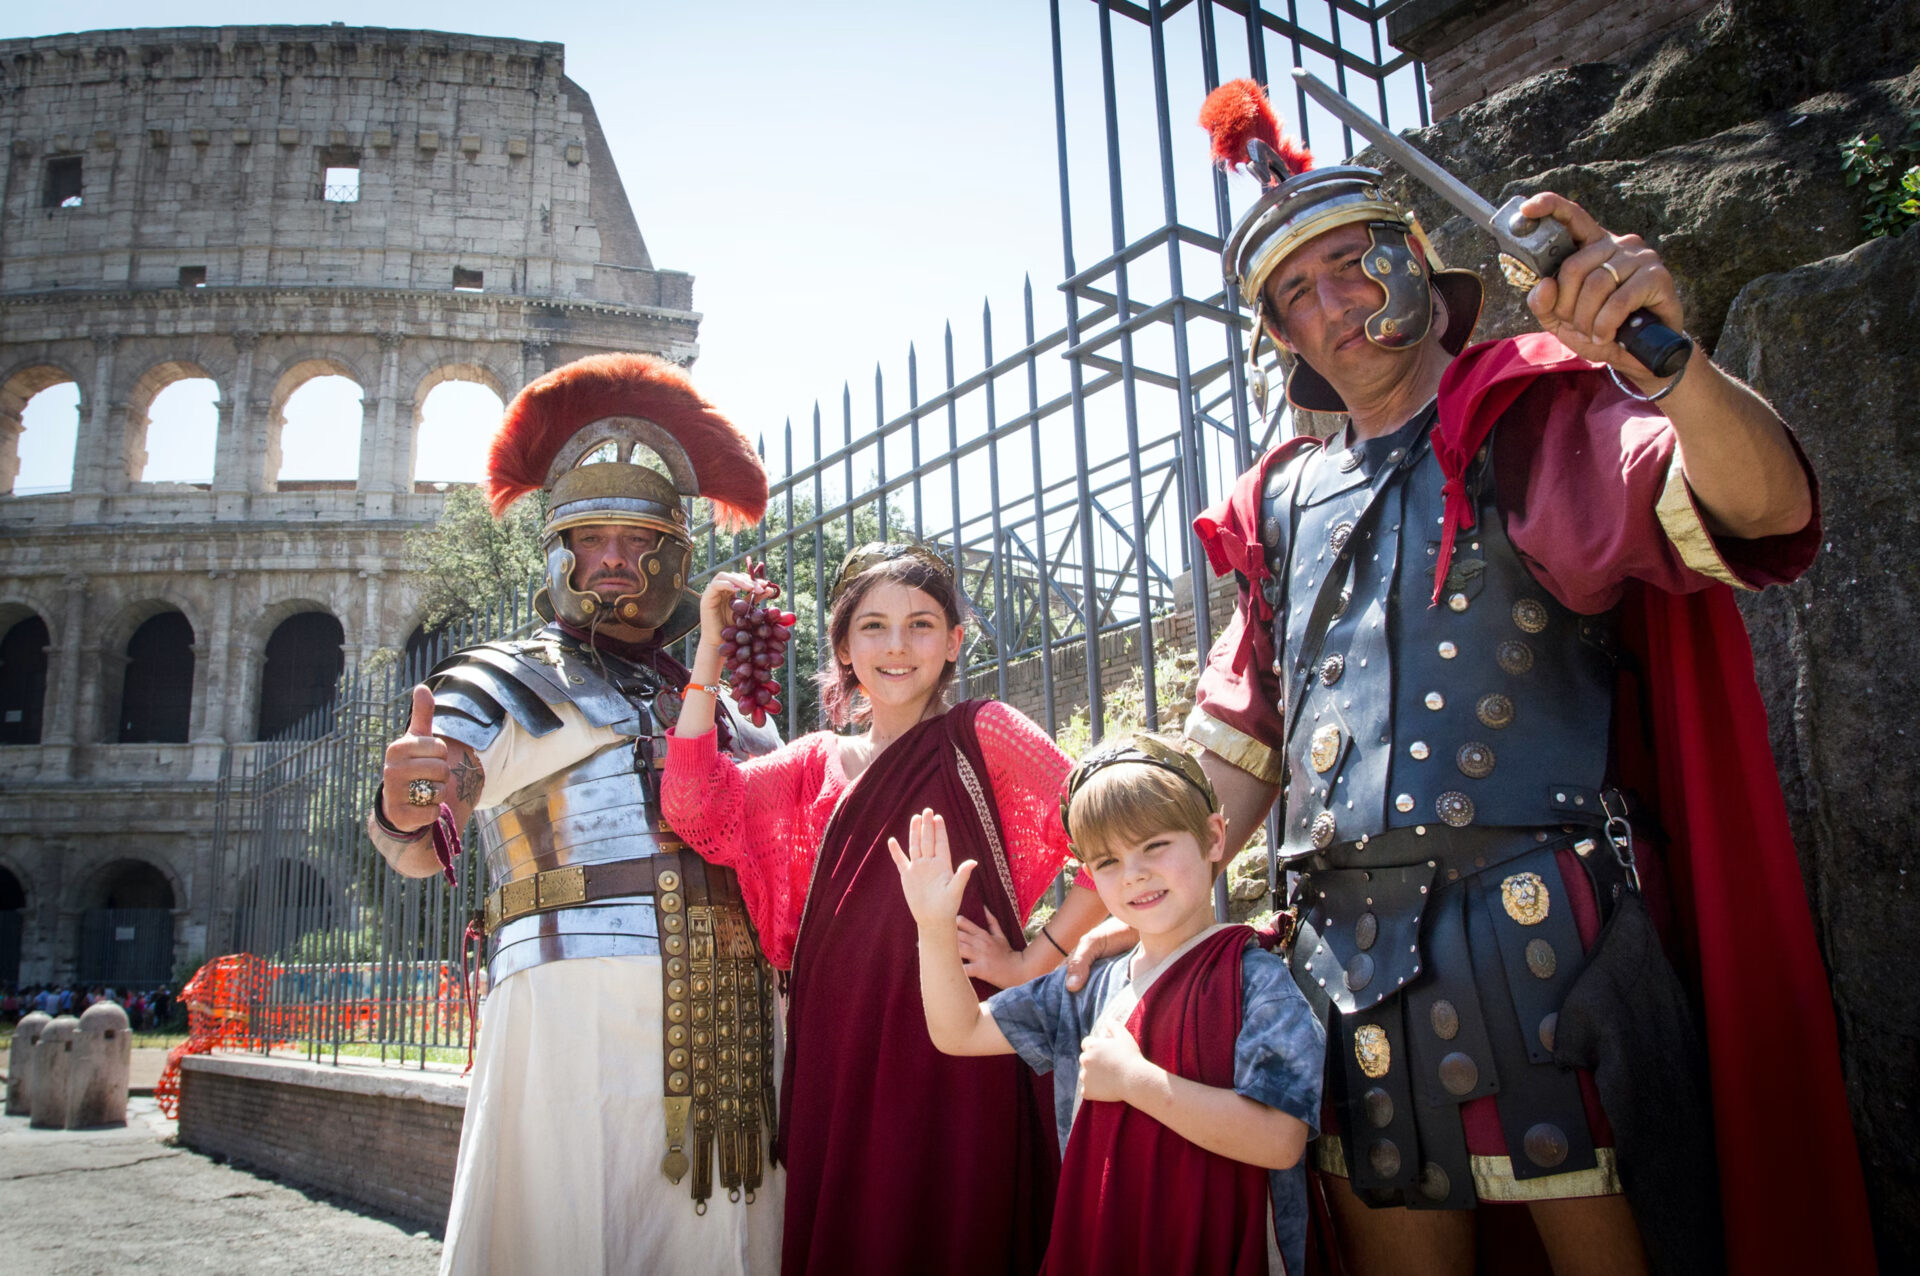 Great Tours for Kids Rome in 1 day: must see tour